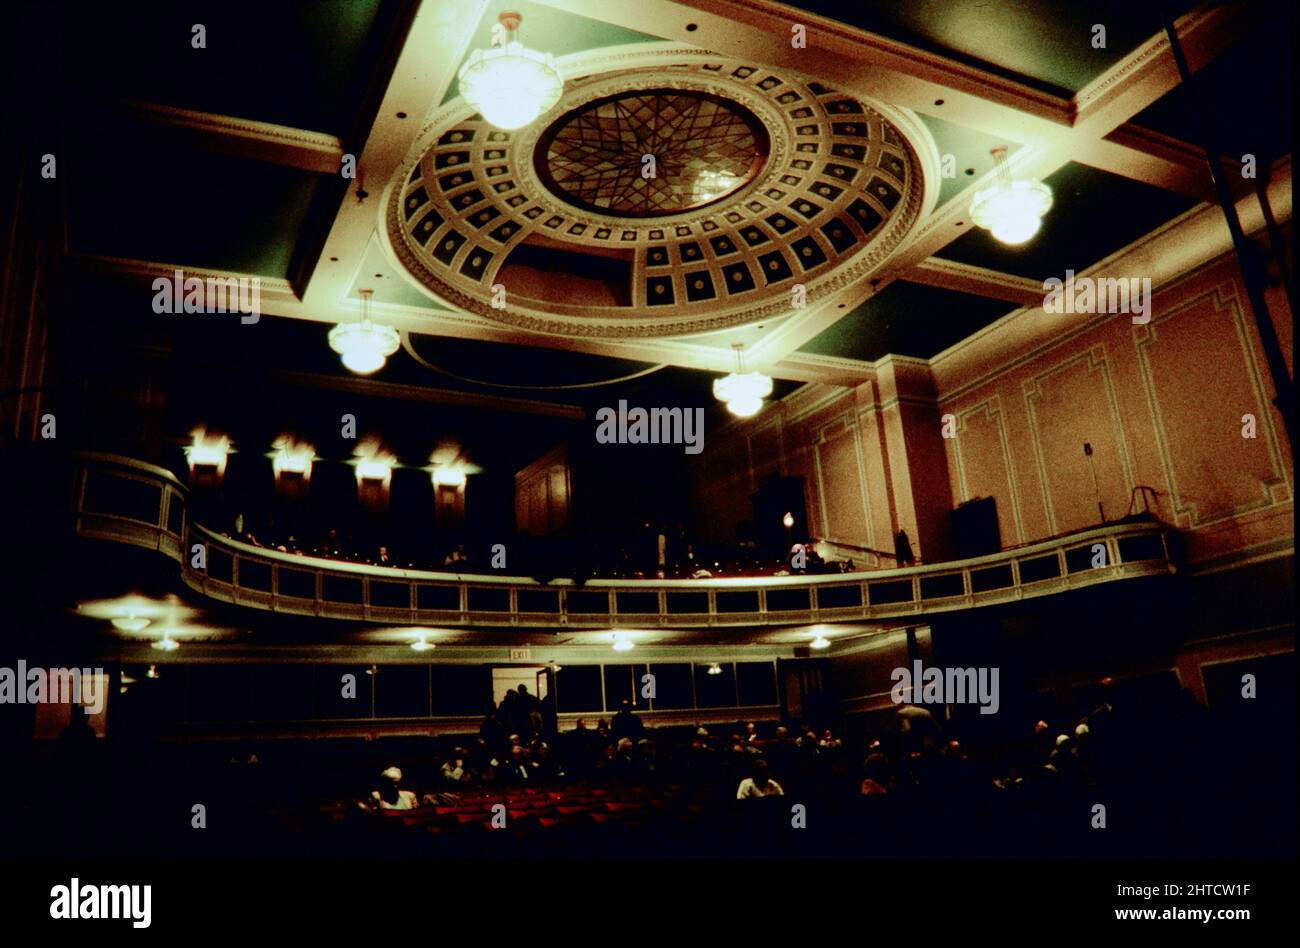 New Gallery, Regent Street, City of Westminster, London, 1970-1999. The auditorium in the New Gallery, showing the ceiling dome, viewed from the front of the stalls. The New Gallery was built as an art gallery in the late 19th century. The building was converted into a restaurant in 1910 and subsequently a cinema in 1913, to the plans of William Woodward &amp; Sons. The cinema was altered in 1925 to the plans of Nicholas &amp; Dixon-Spain. The New Gallery Cinema operated until 1953. The building was used as a church until the 1990s. It was later used for retail. Stock Photo